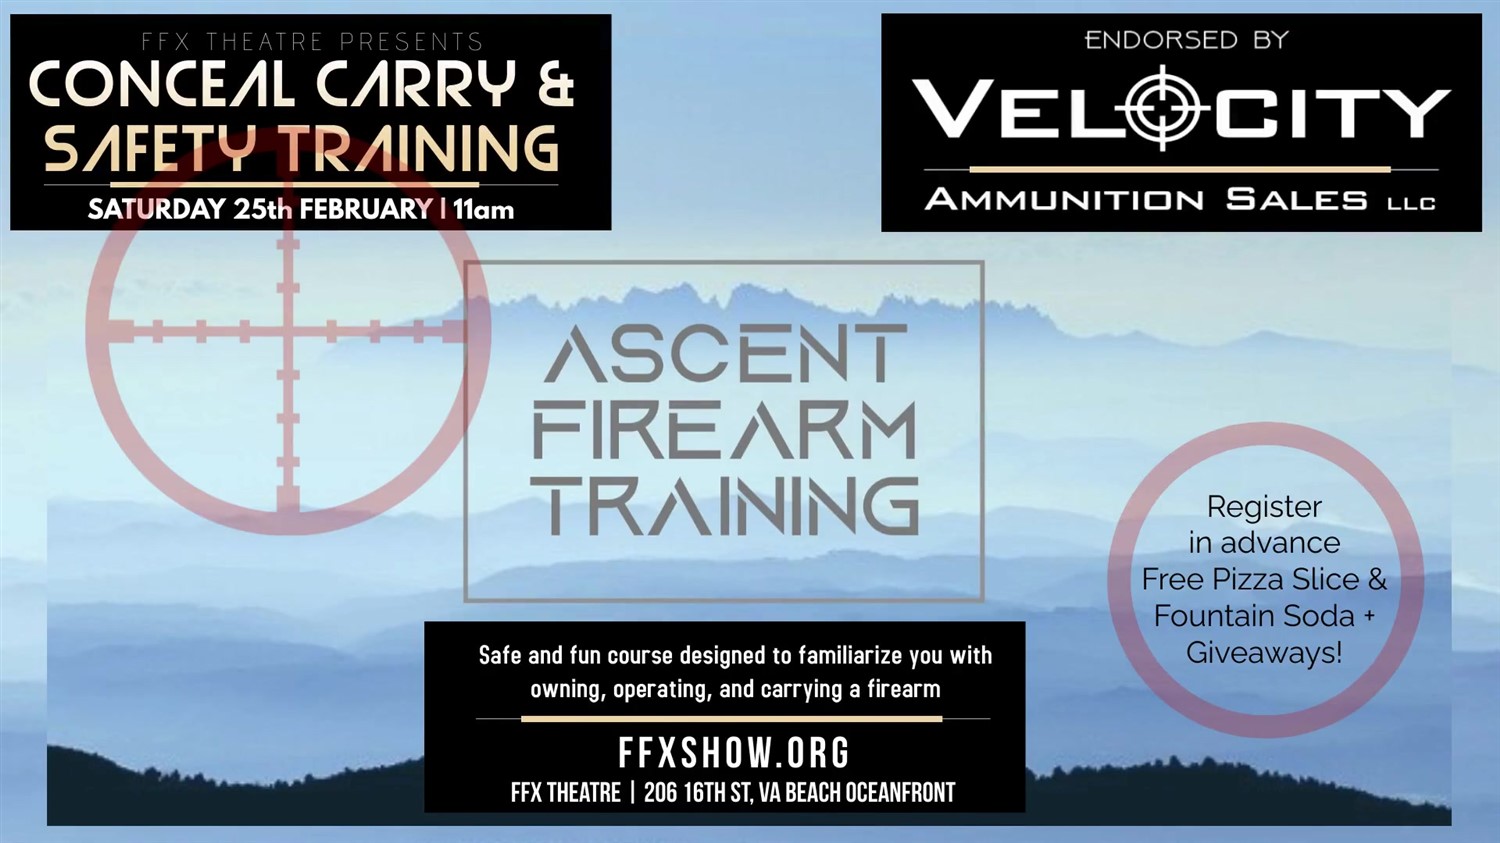 ASCENT FIREARM TRAINING Conceal Carry and/or Safety Class on feb. 25, 11:00@FFX Theatre - Compra entradas y obtén información enFamily Fun Xperience tickets.ffxshow.org